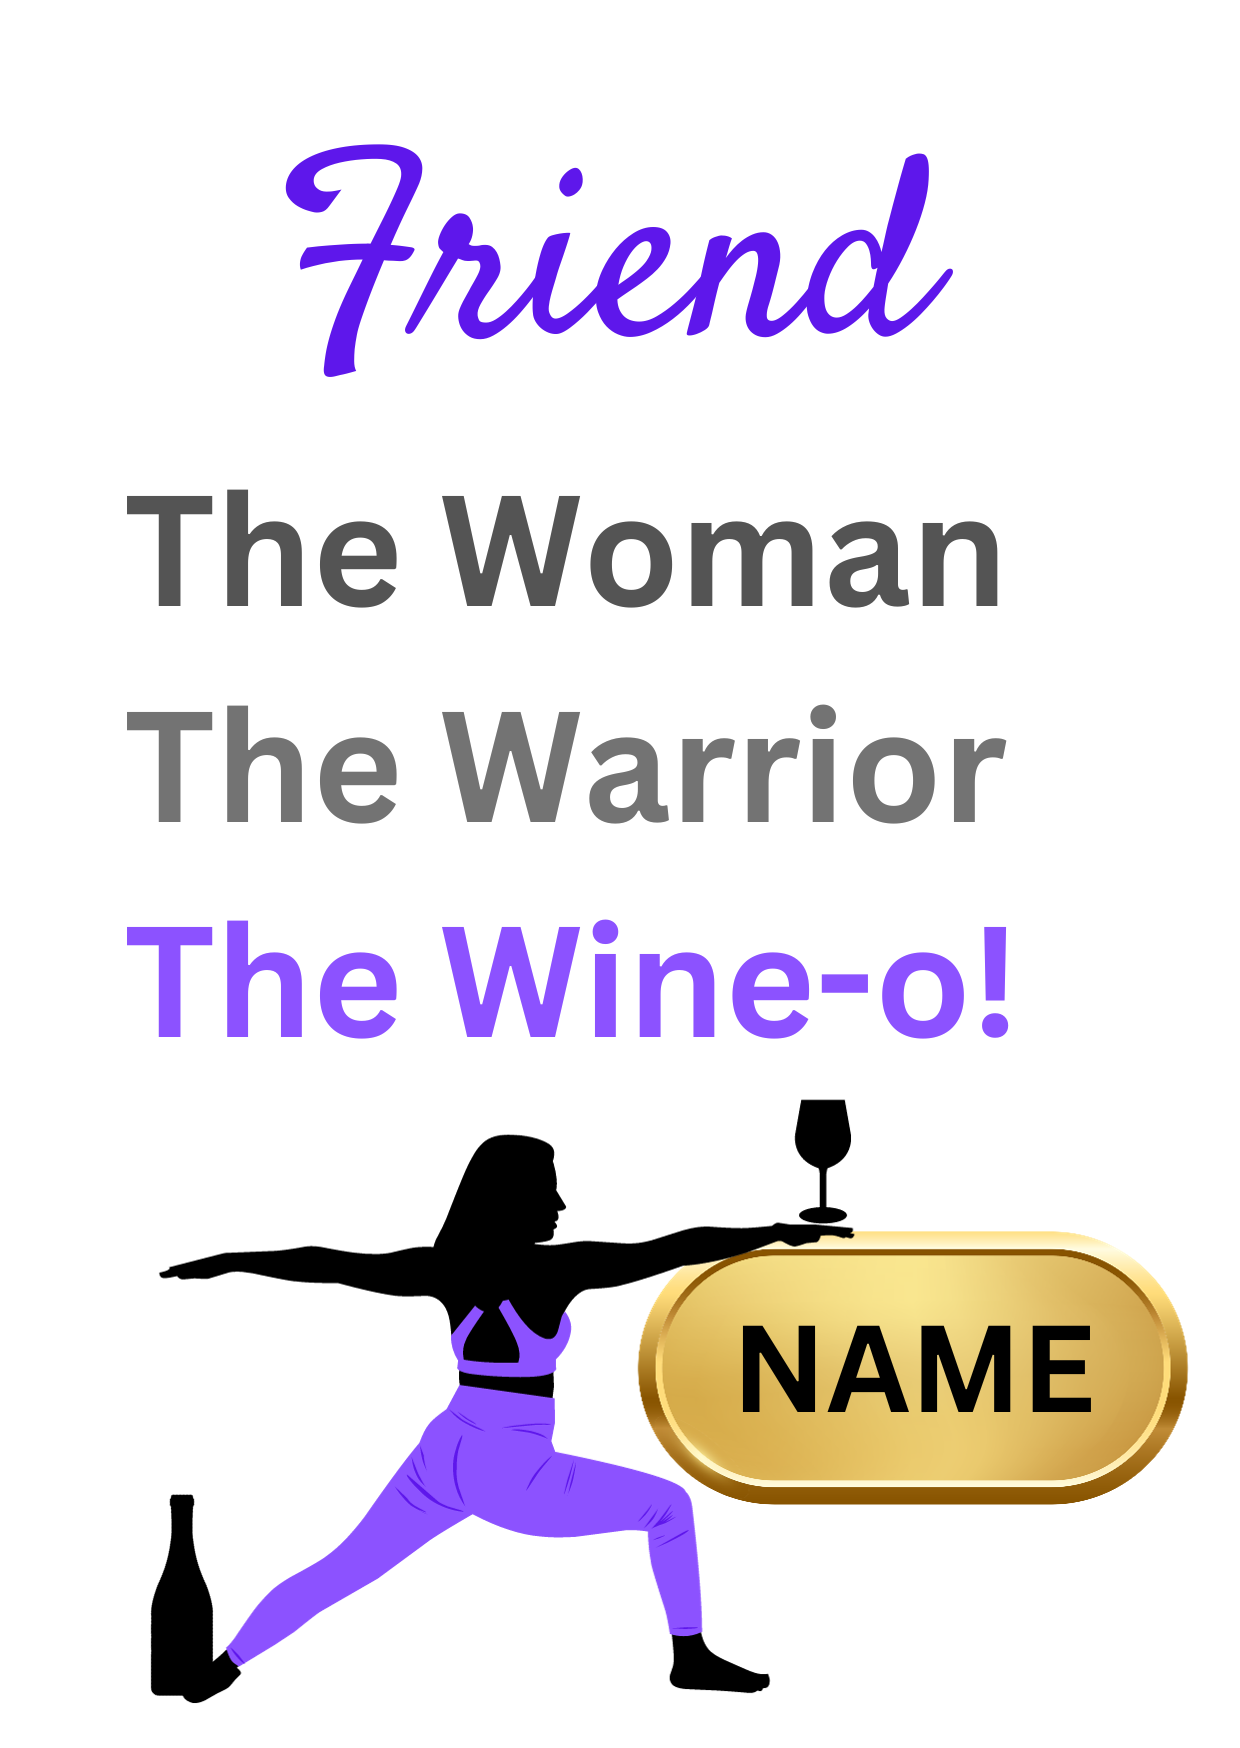 Front of the Friend Warrior Woman Wine-o Birthday Card featuring woman doing warrior yoga pose holding a wine glass with personalised name in gold plaque